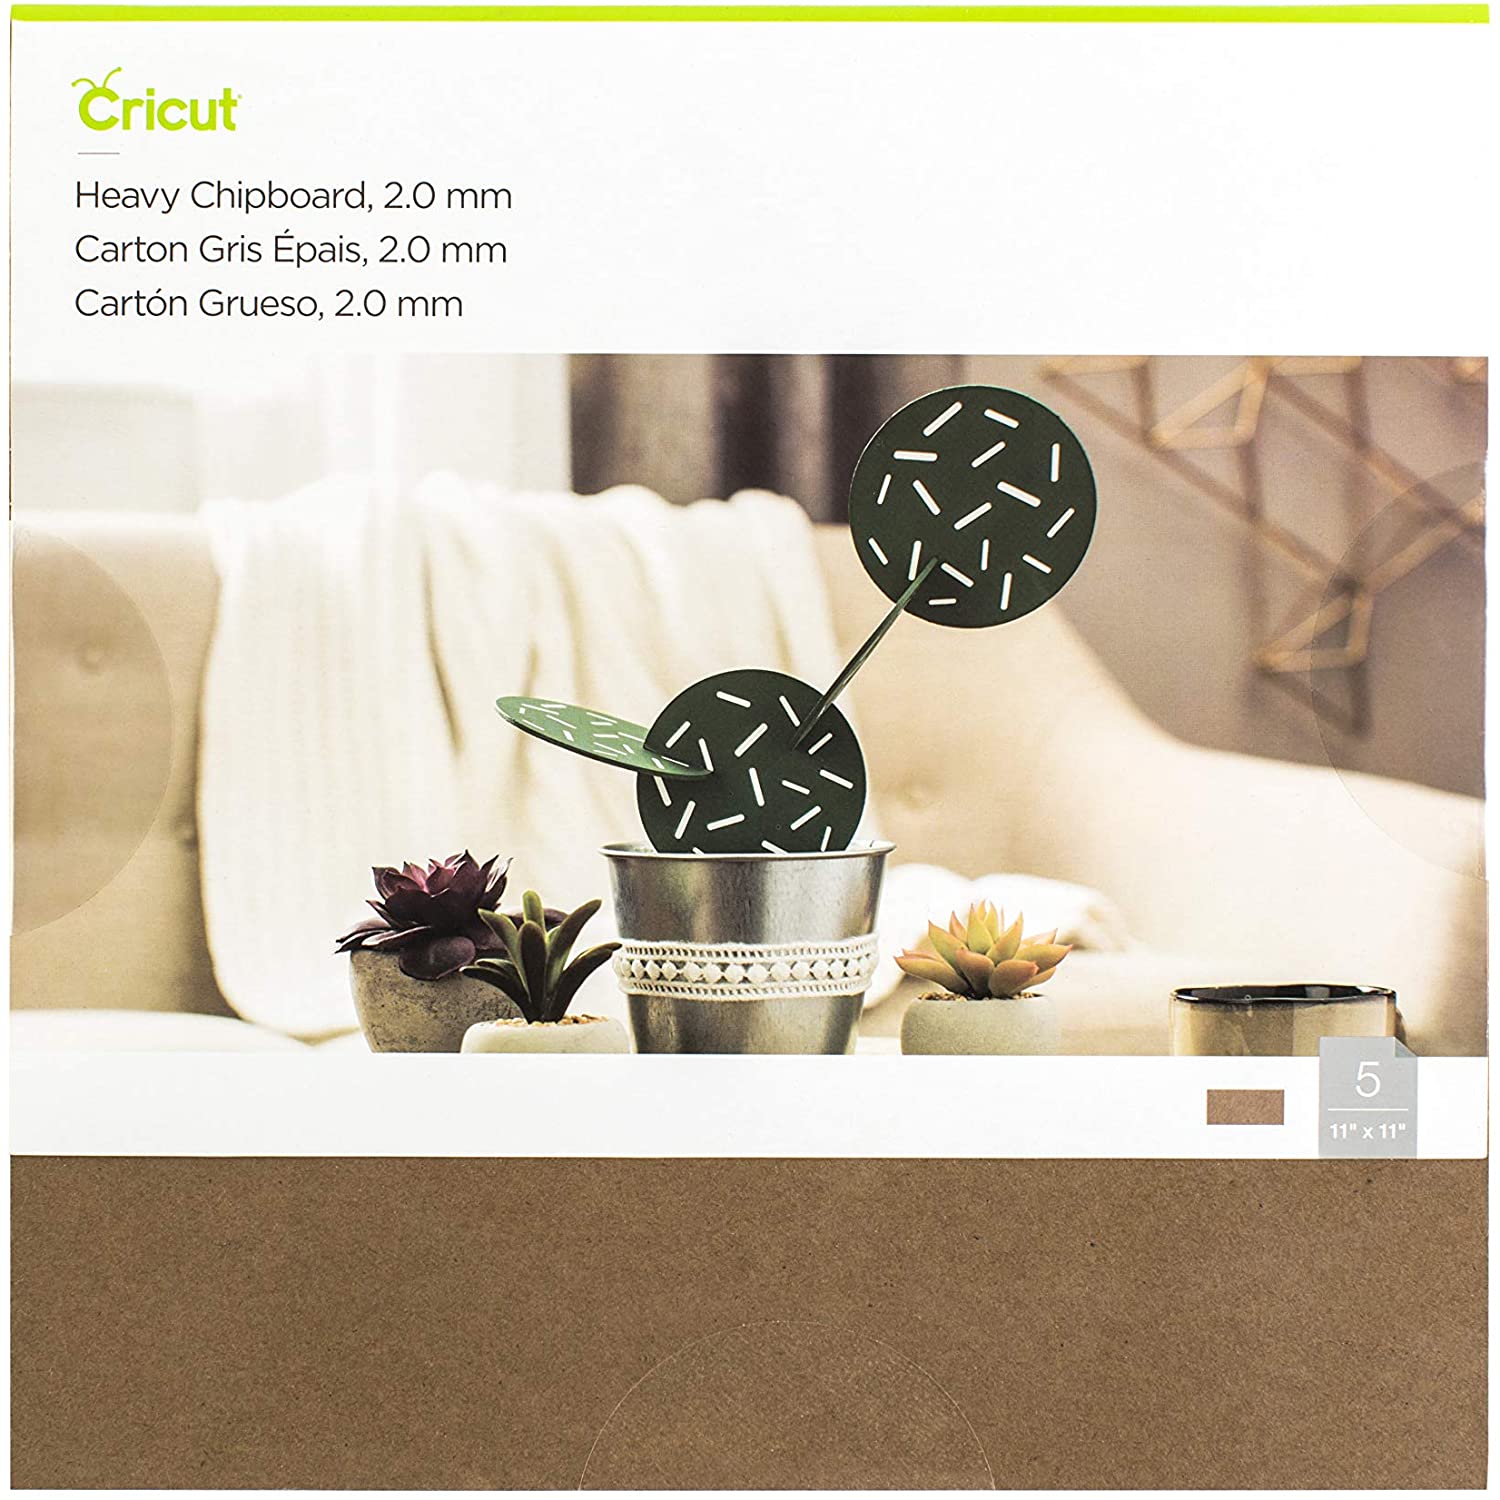 Cricut Heavy Chipboard, Brown, Pack of 5